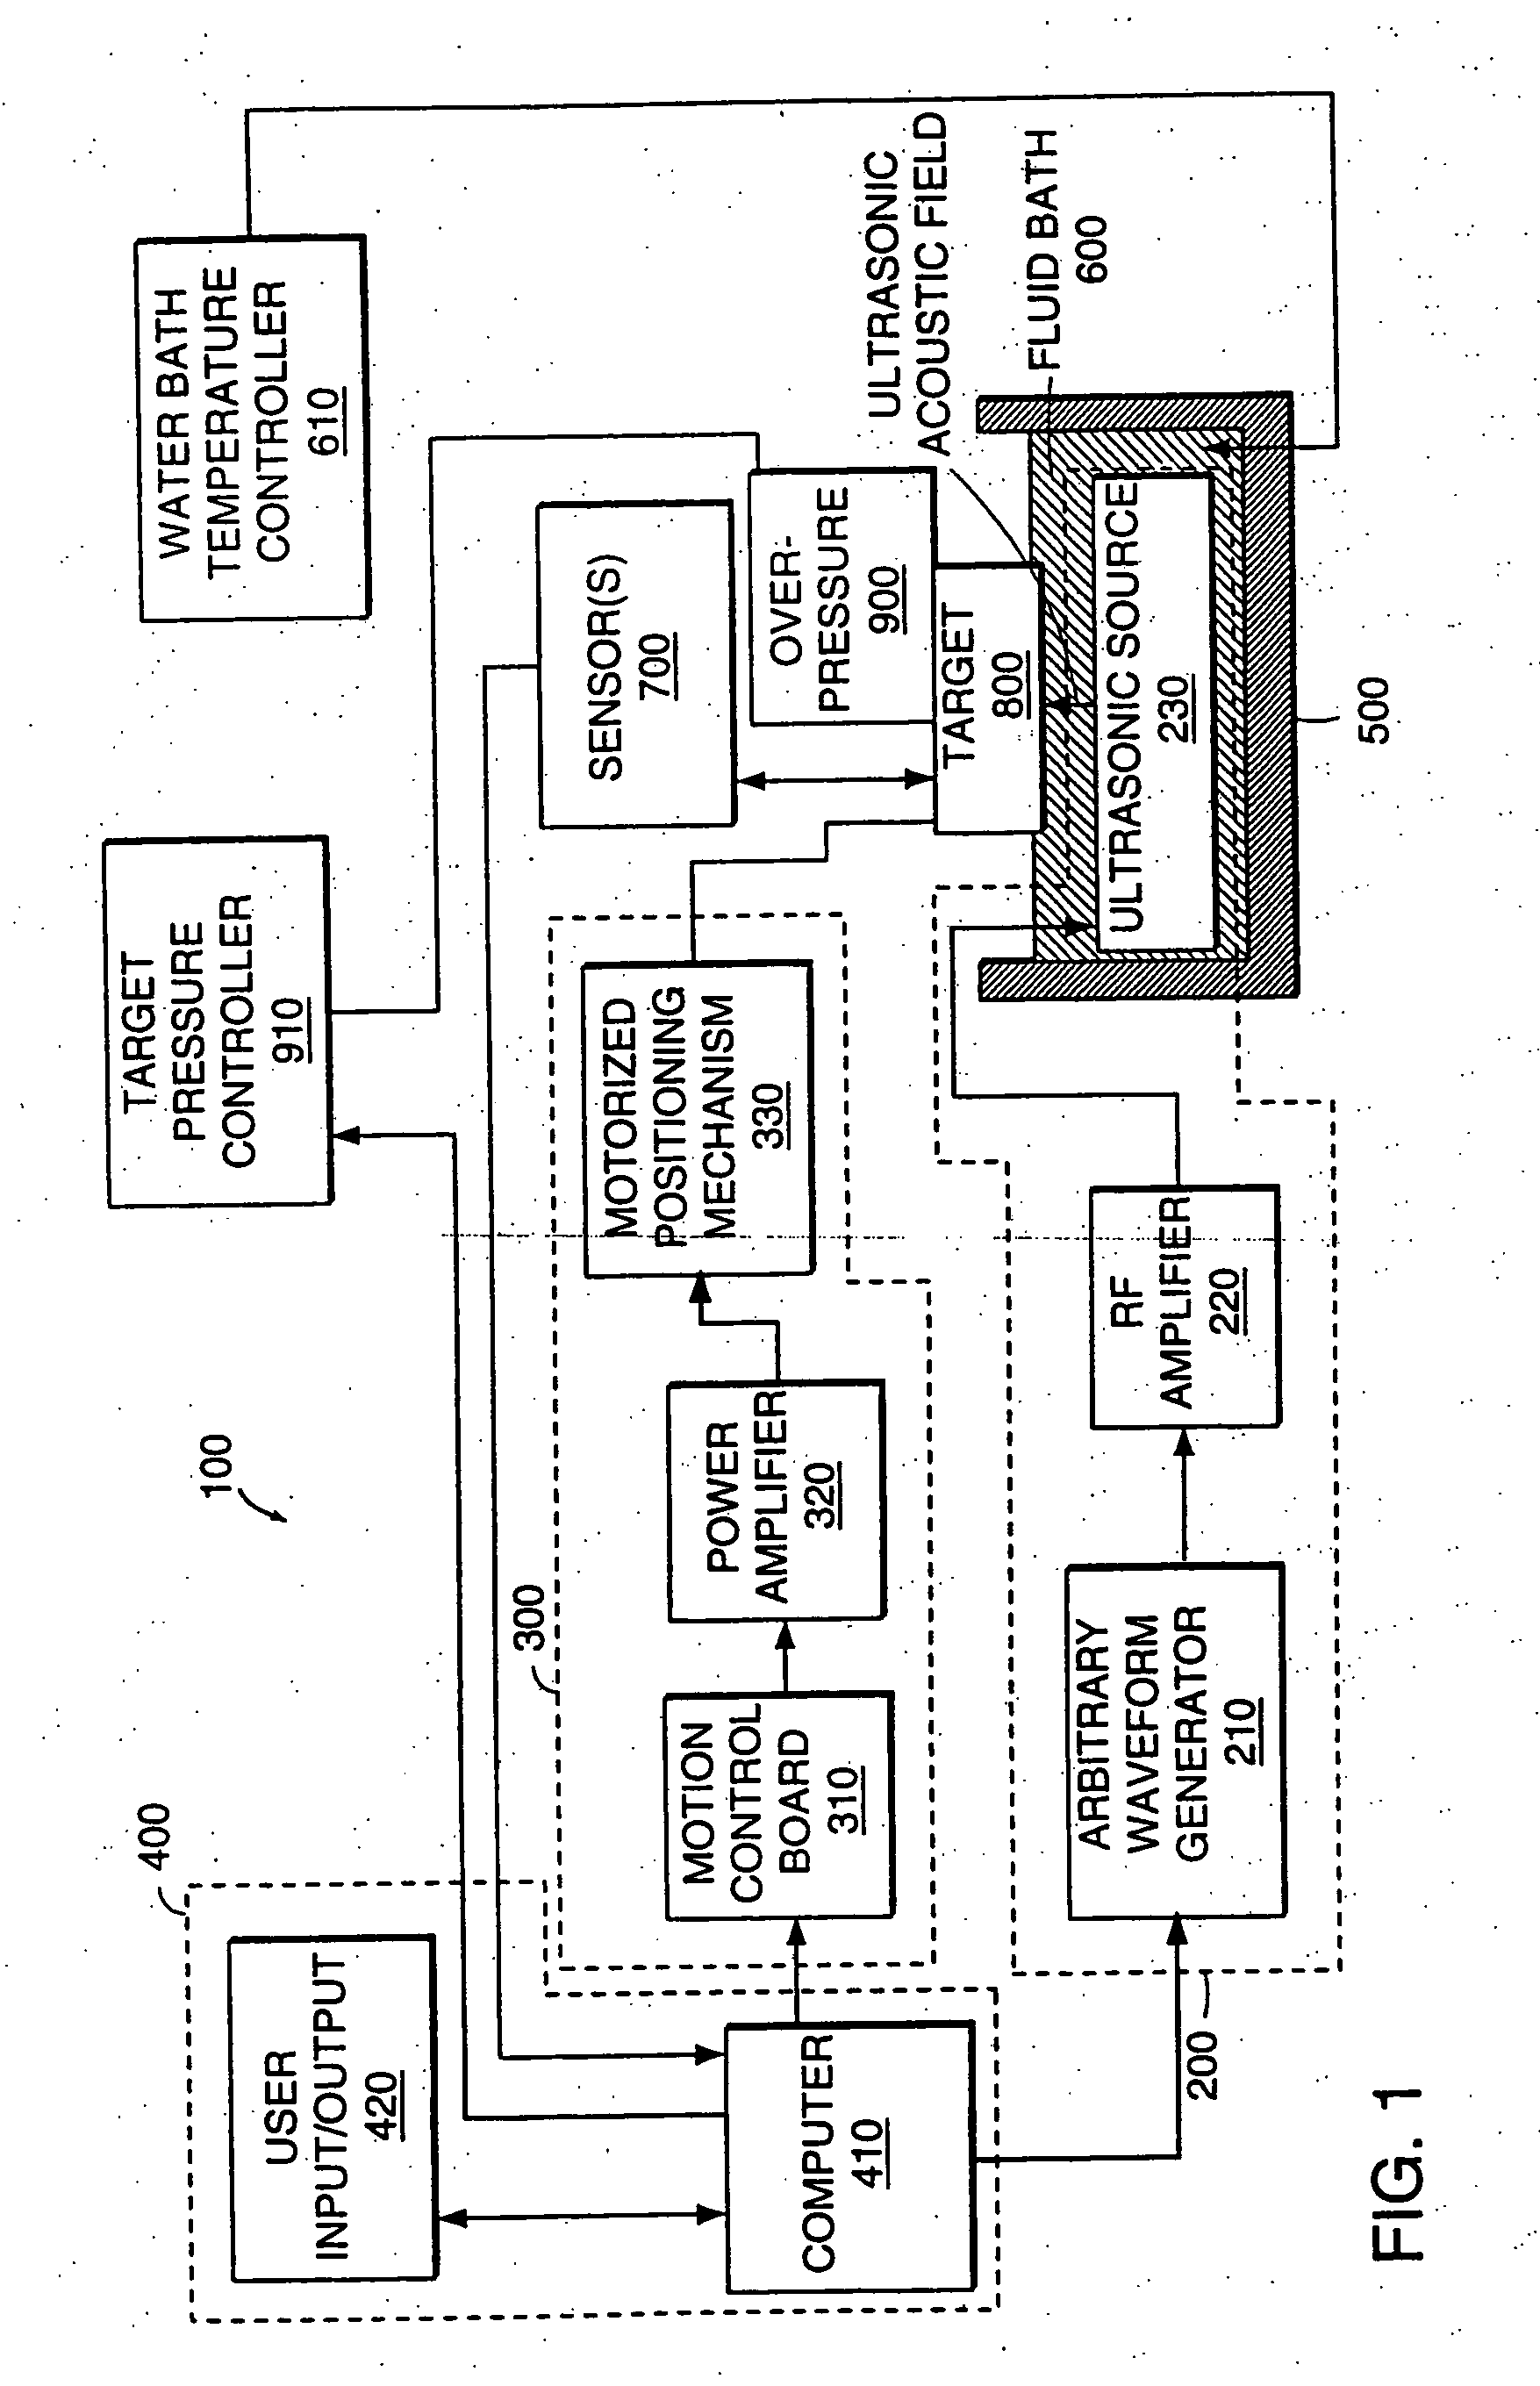 Methods and systems for modulating acoustic energy delivery